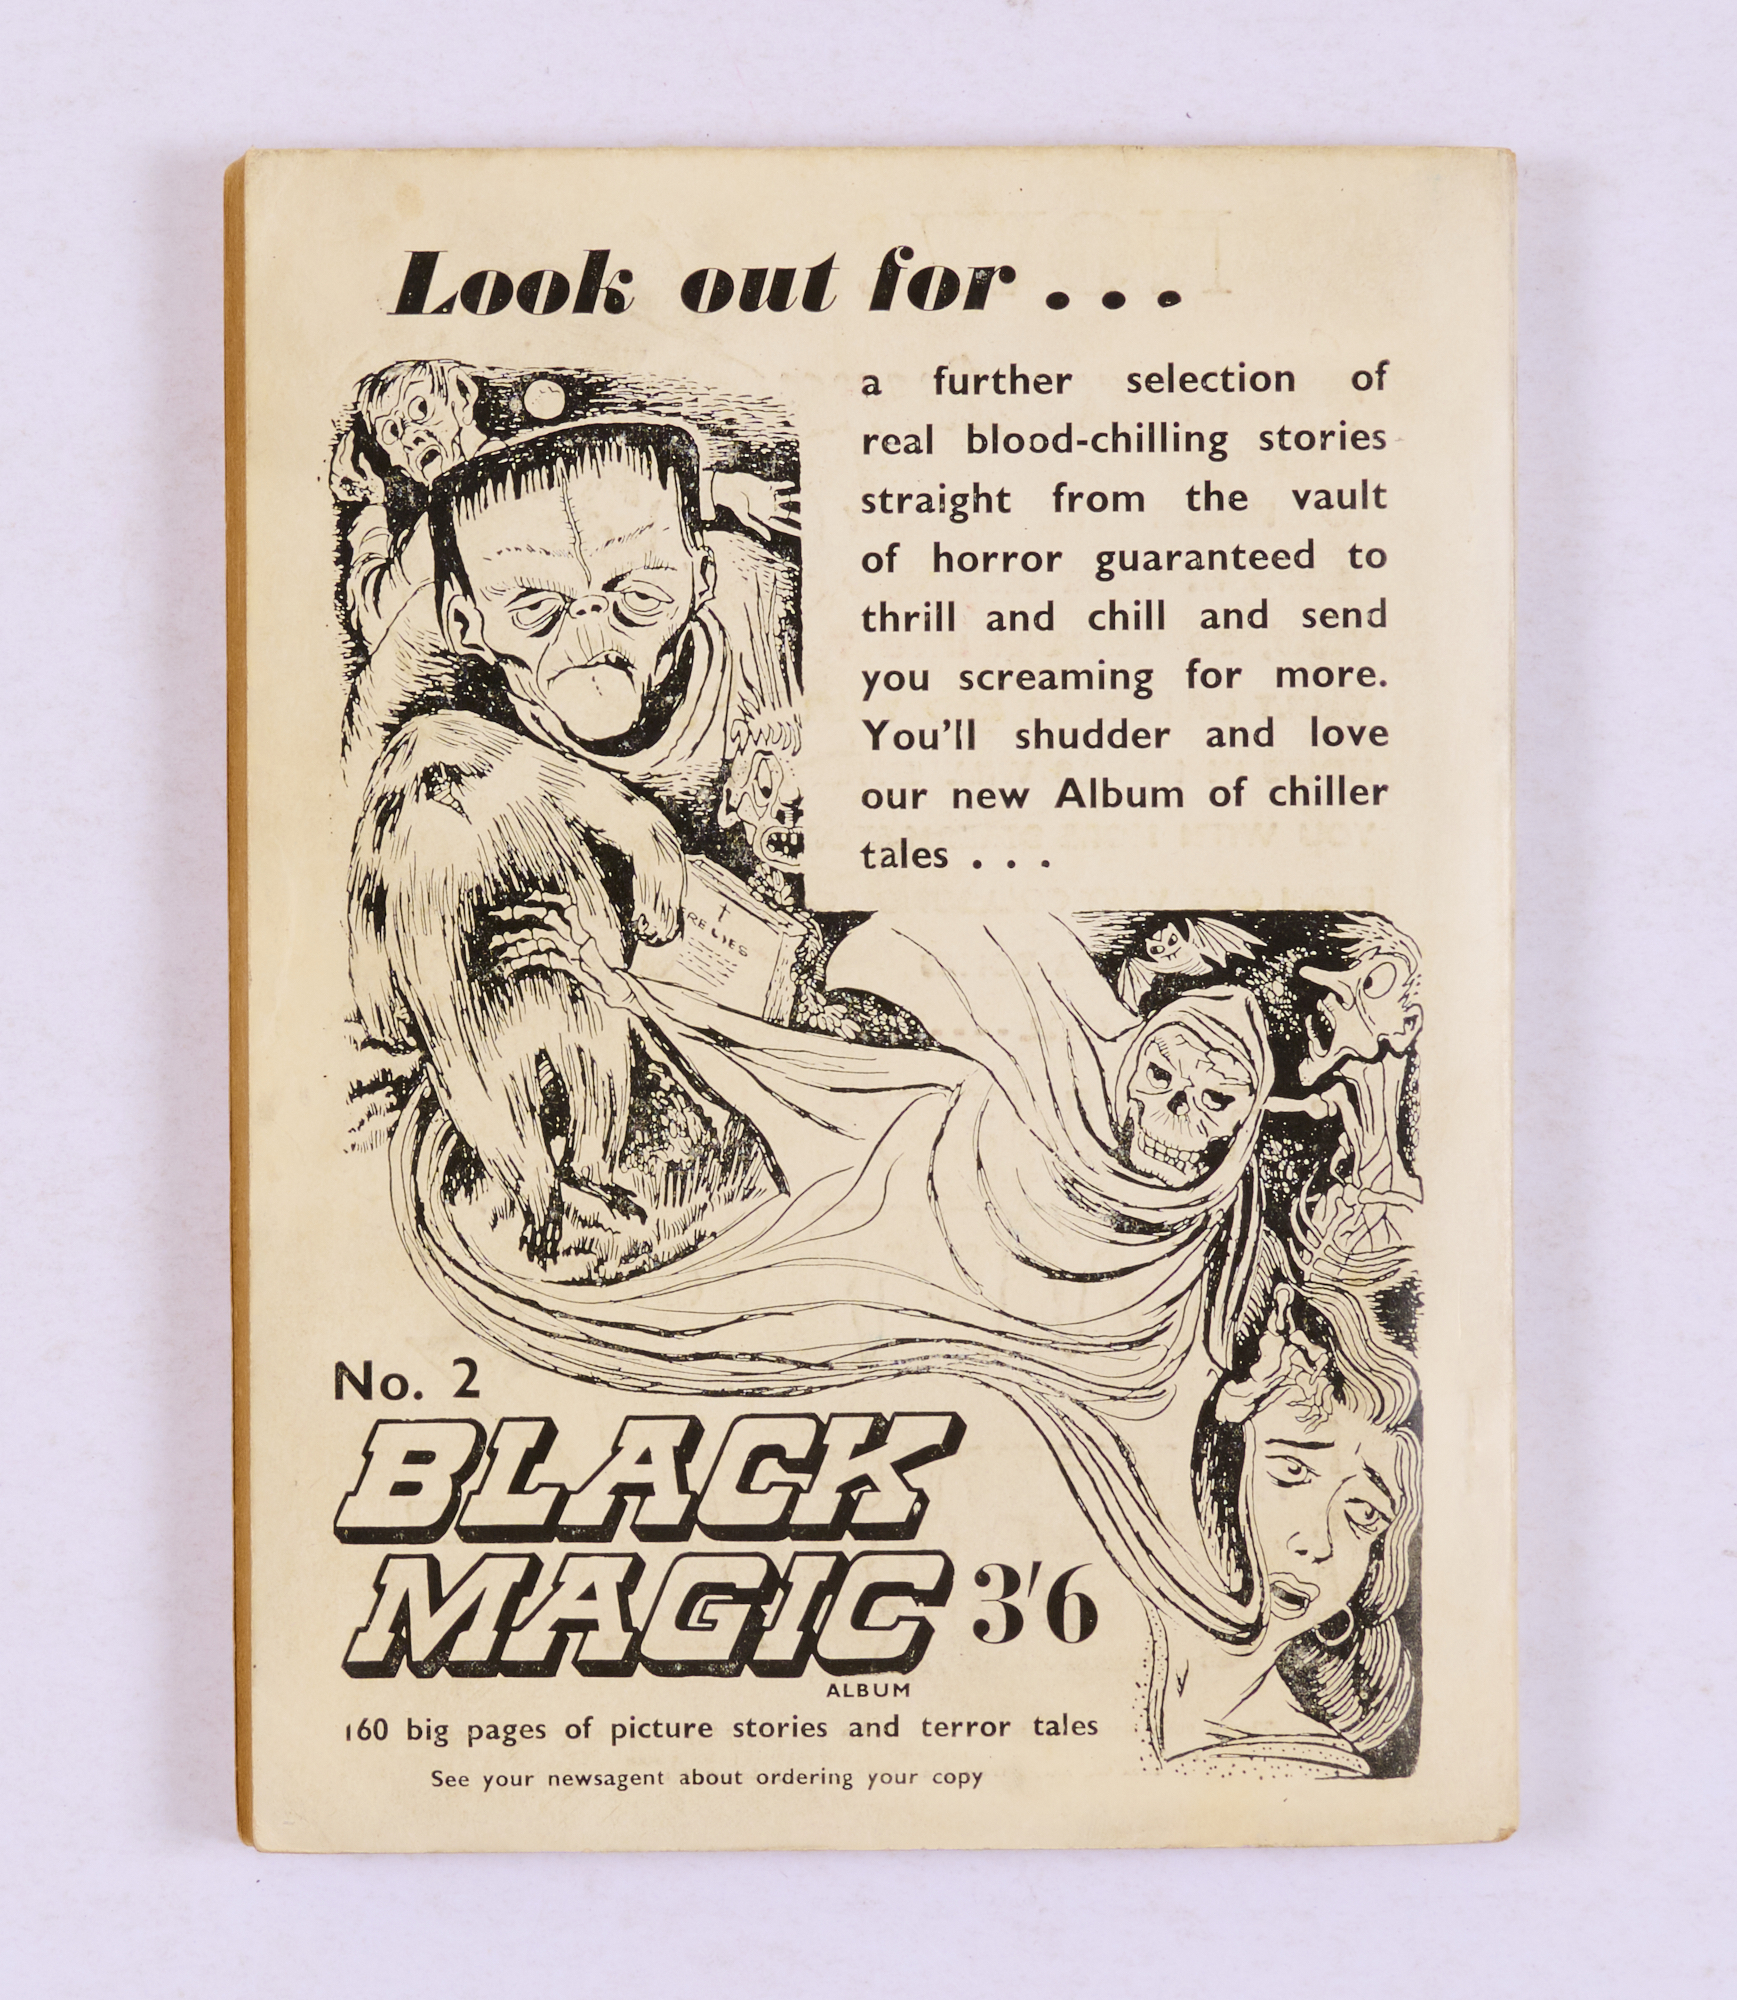 Black Magic Album 1 (1954 Arnold Book Co). Simon & Kirby cover art from Vol. 3 # 2 of the U.S. - Image 3 of 3